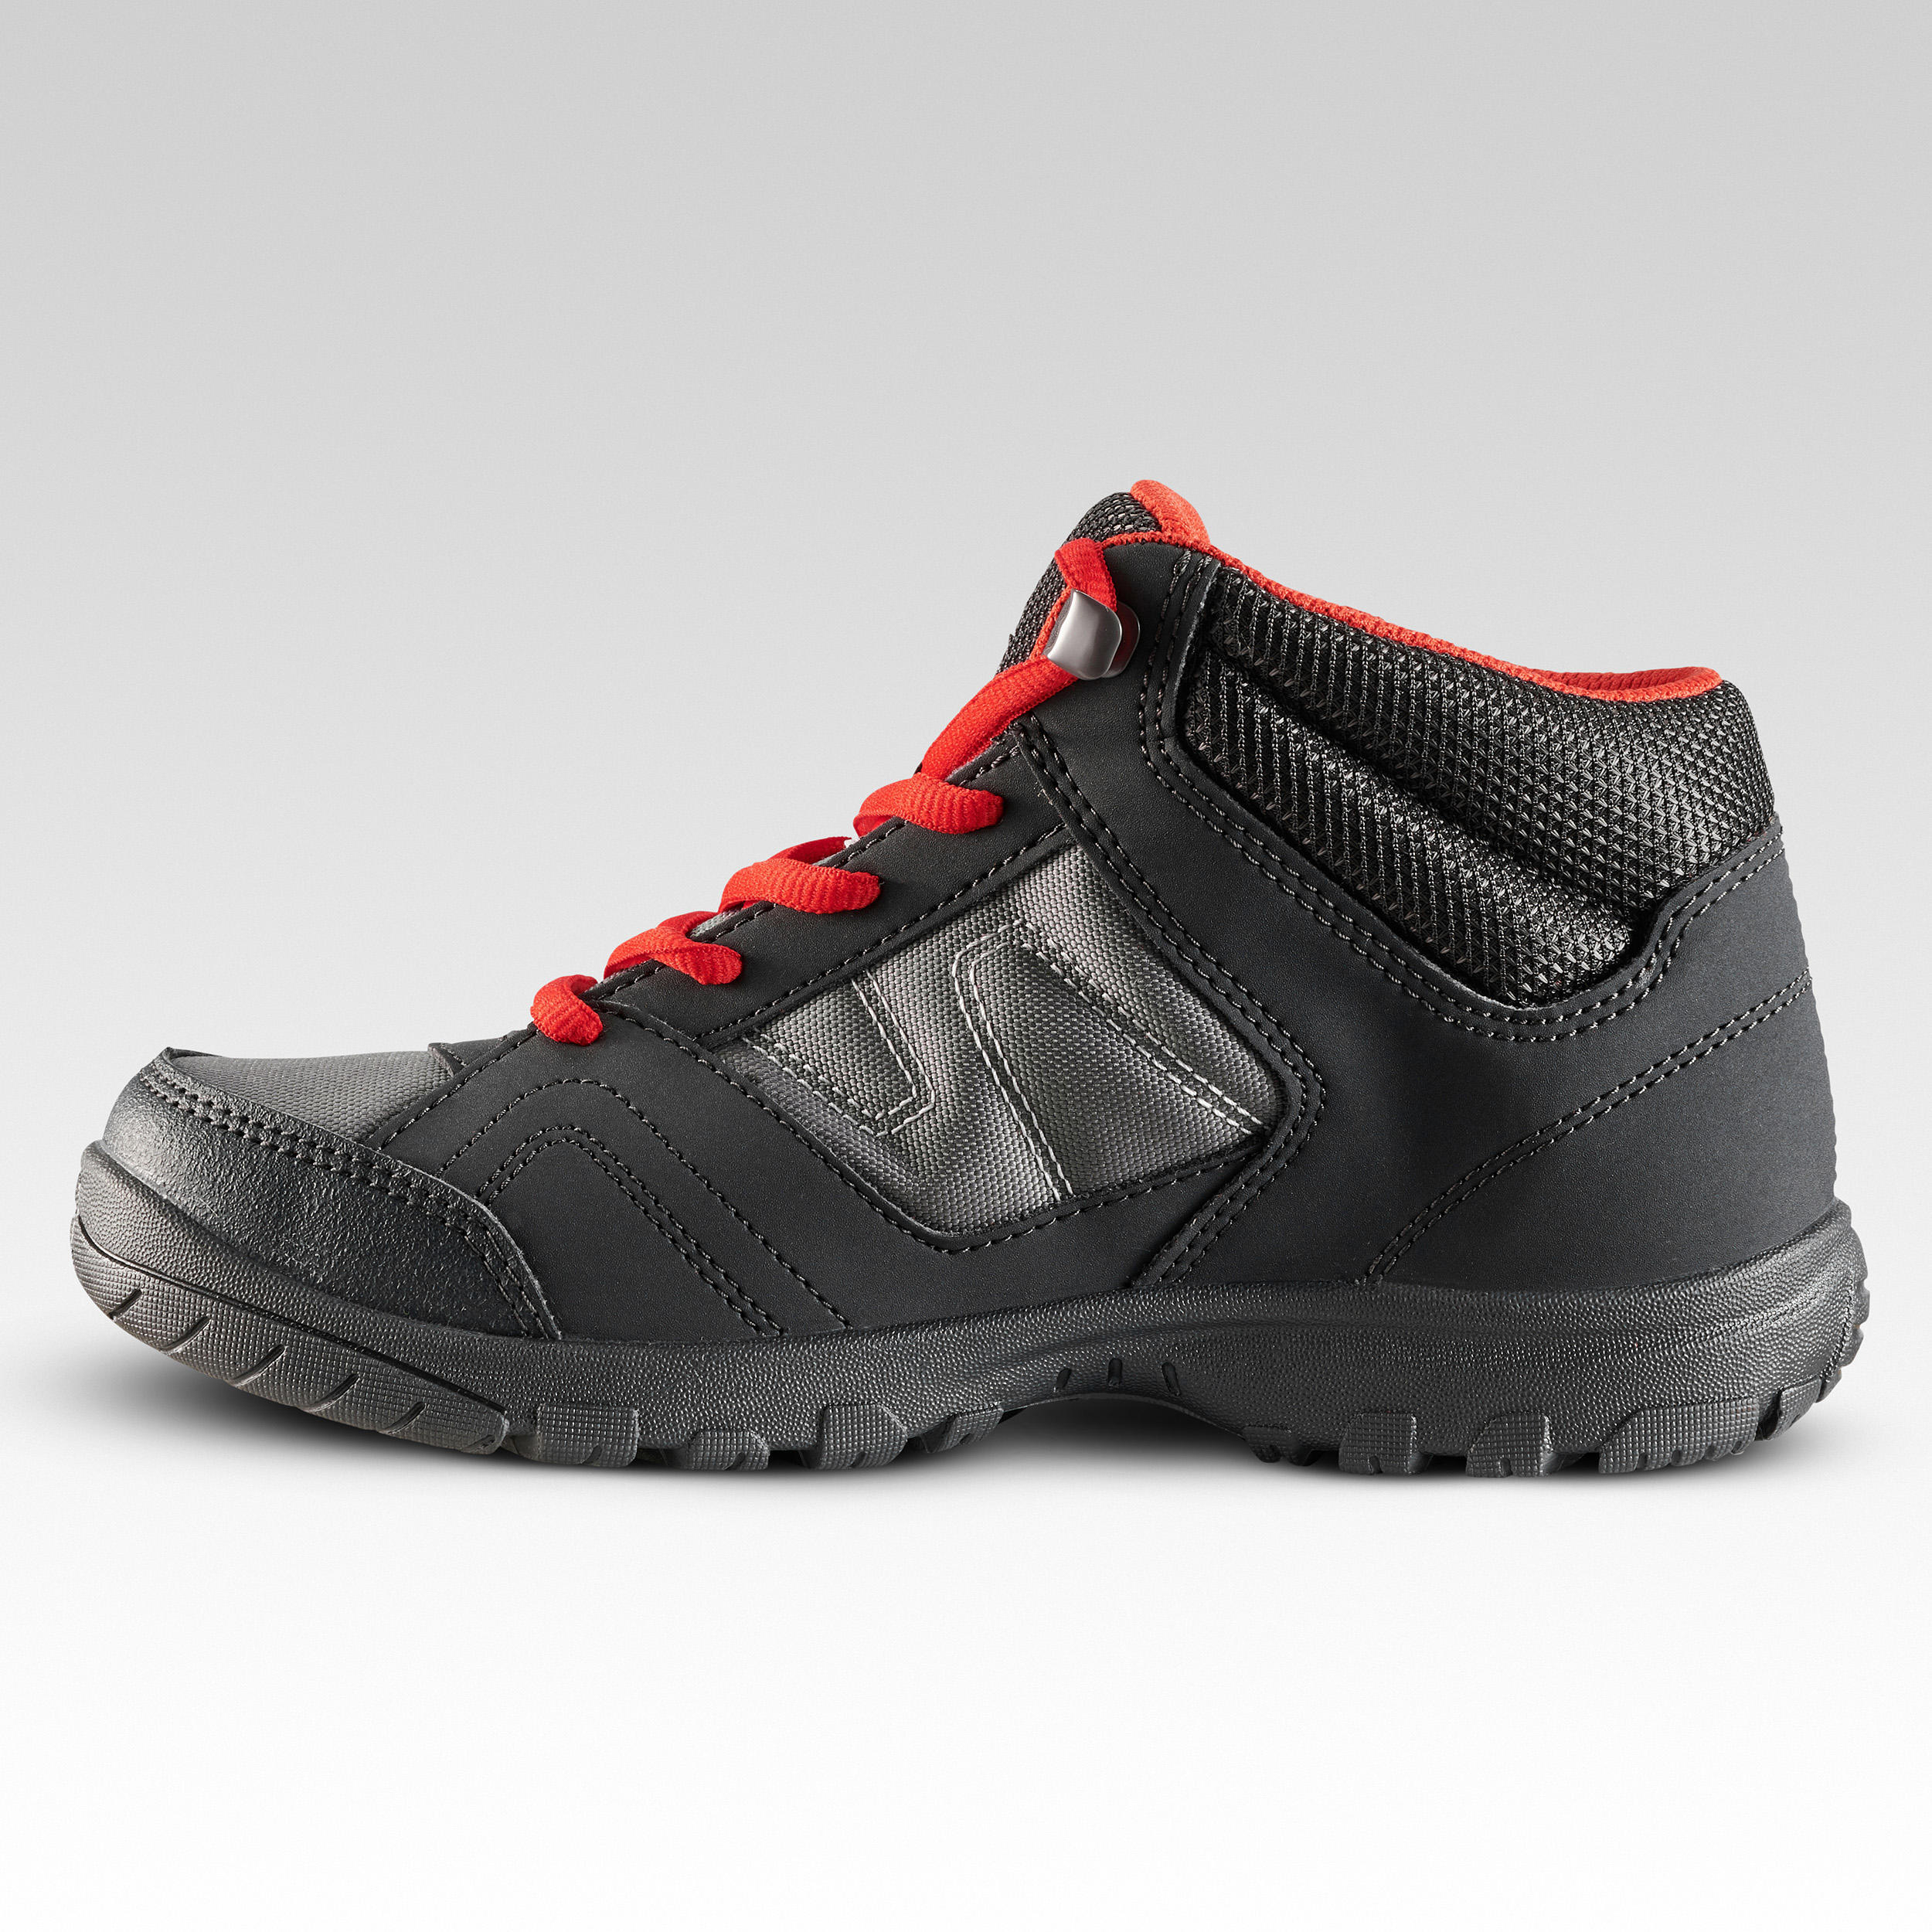 Kids Hiking Boots 35 TO 38 Mid JR MH100 - Black/Red 2/6